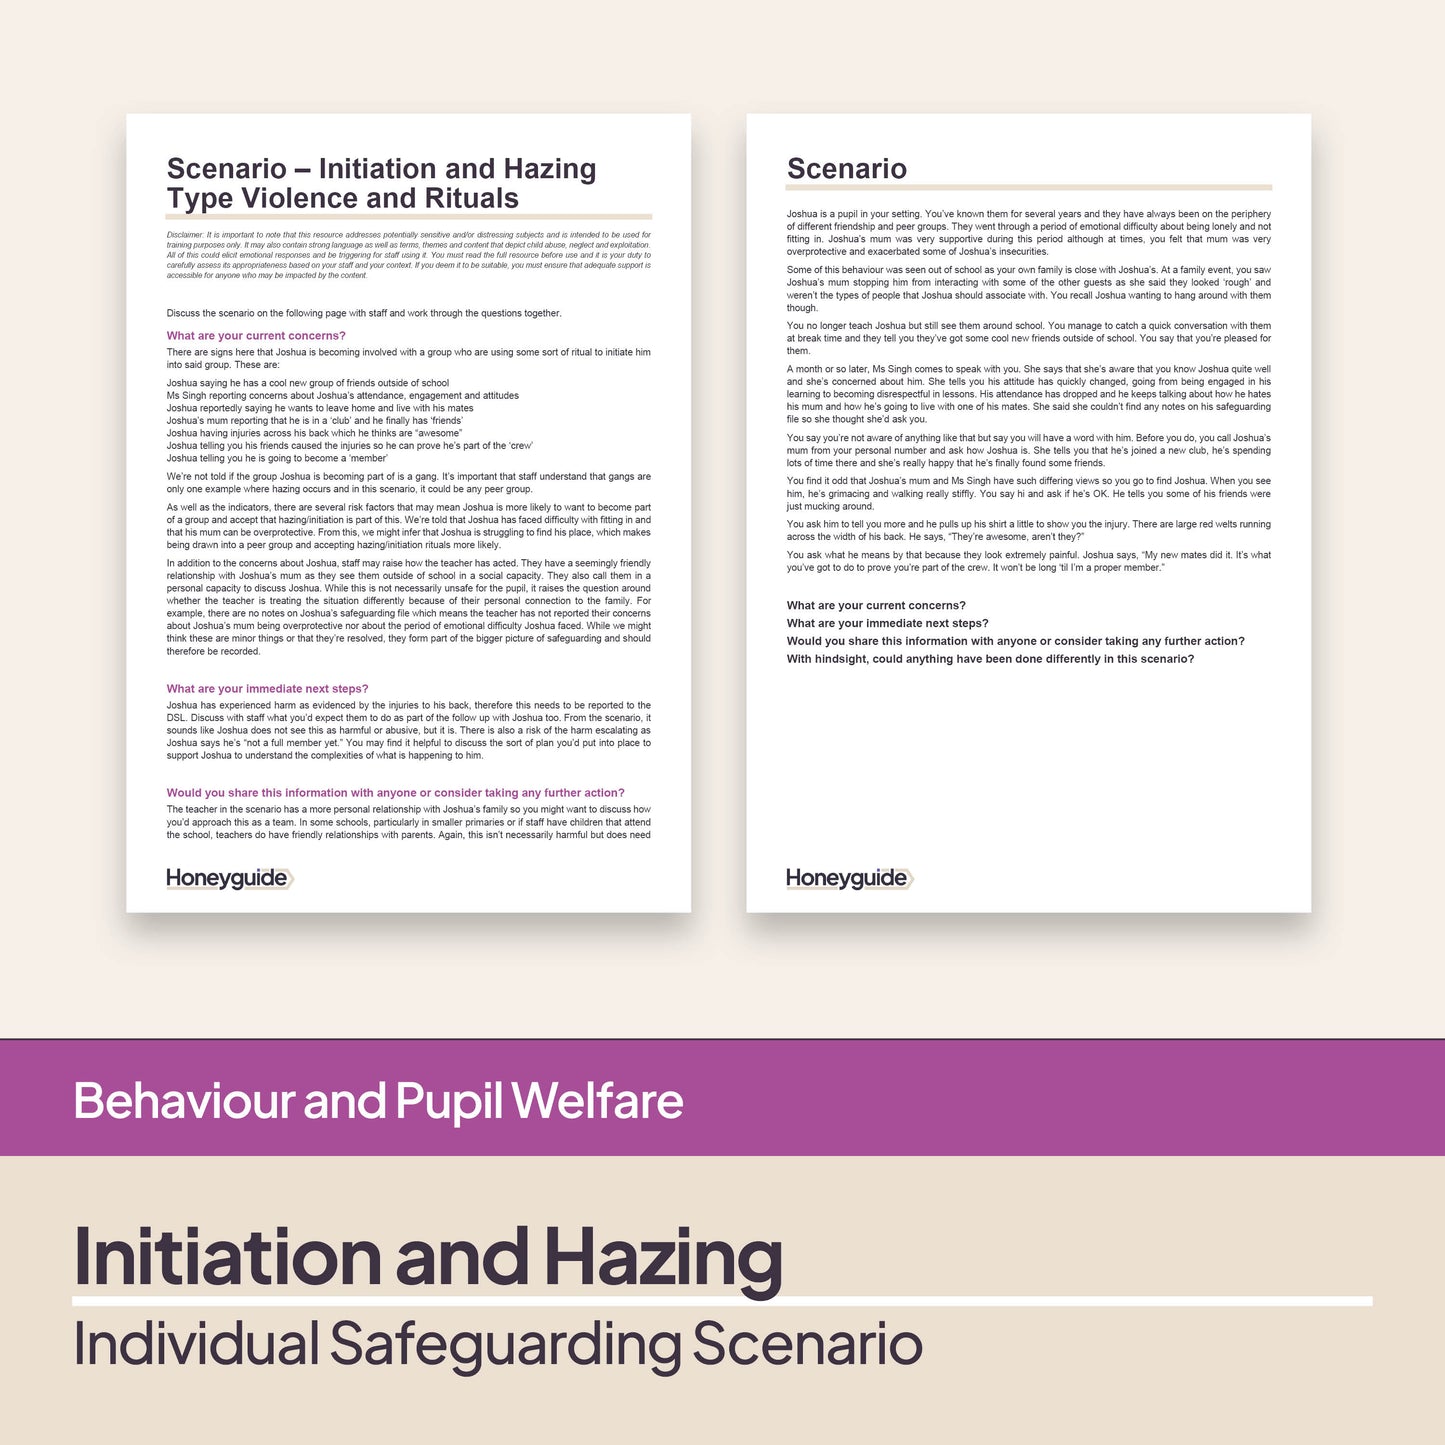 Safeguarding Scenario: Initiation and Hazing Type Violence and Rituals